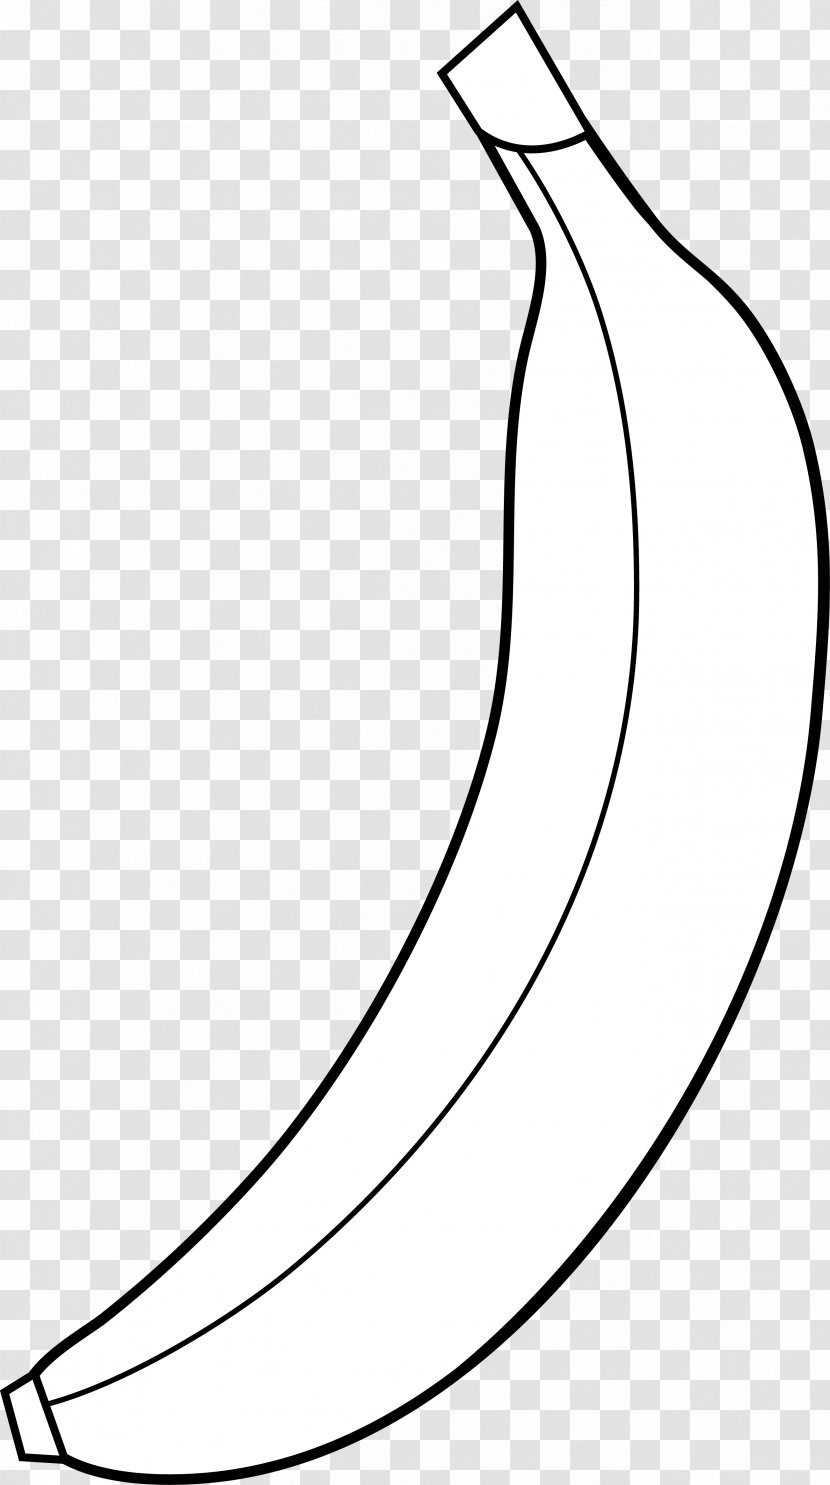 Banana Muffin Black Clip Art - Monochrome Photography - Outline Cliparts Transparent PNG